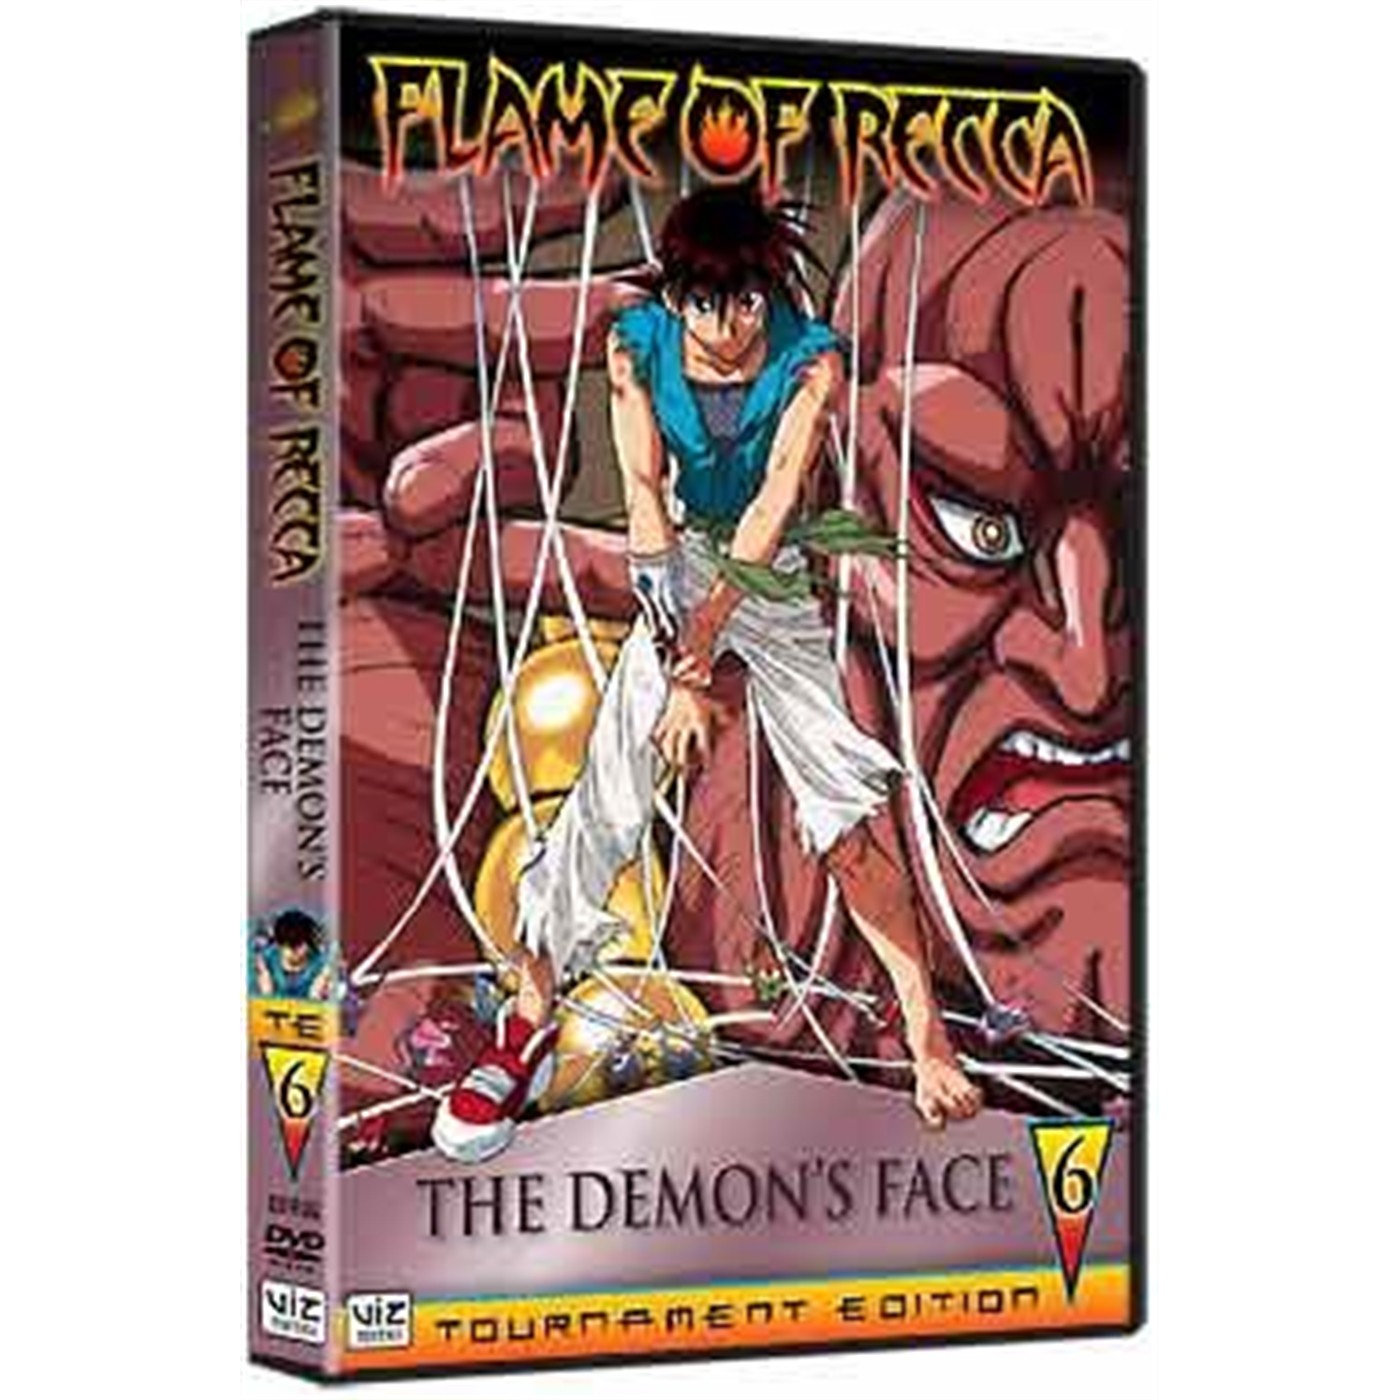 Flame of Recca, Vol. 6: The Demon's Face (DVD)